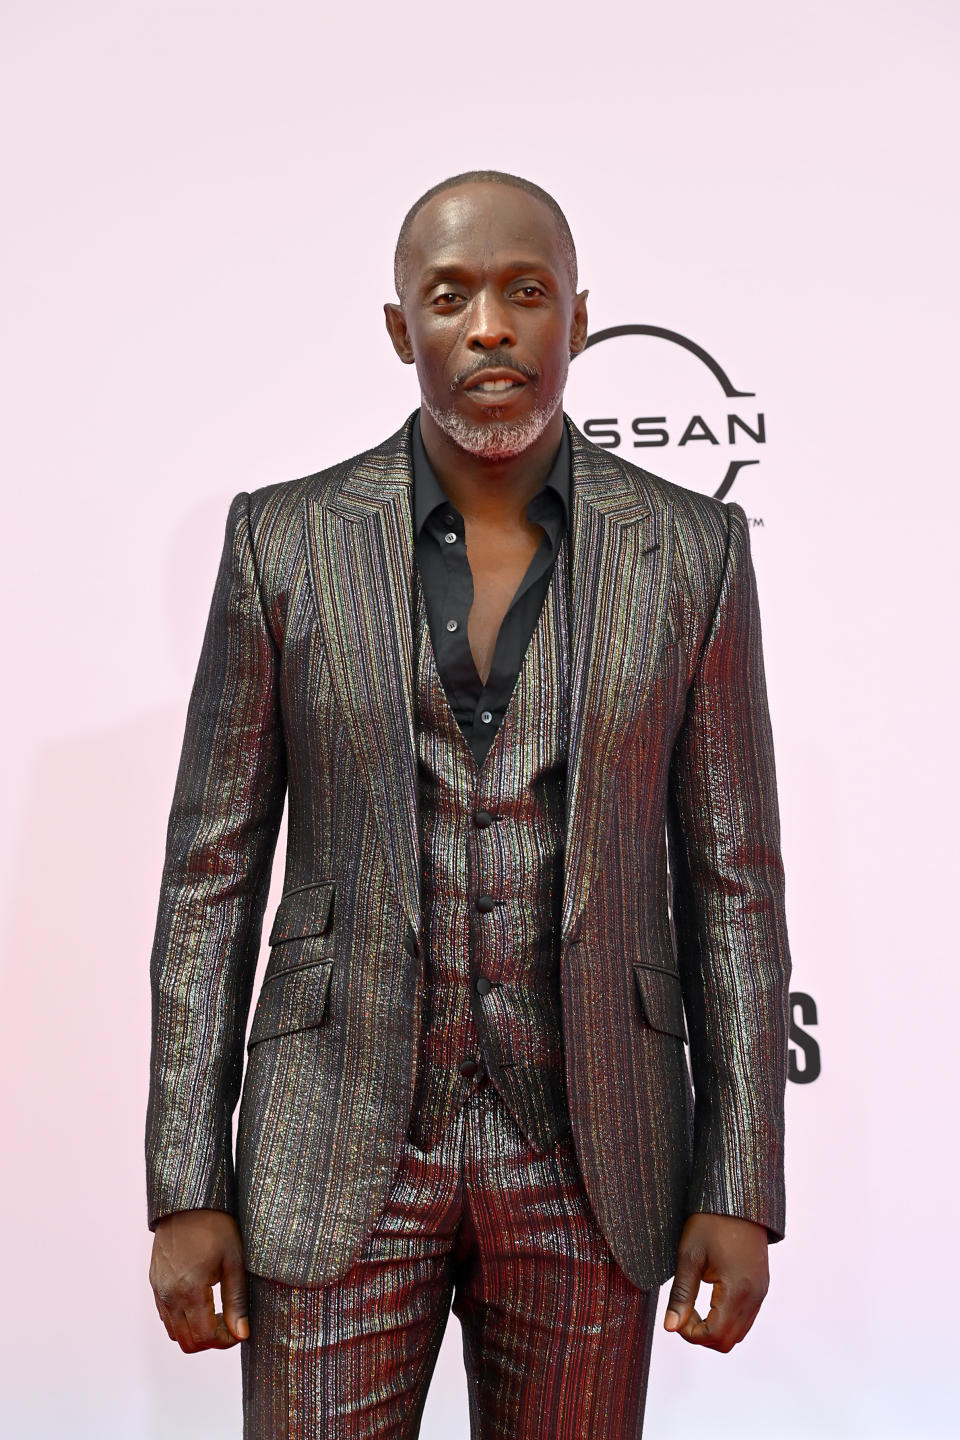 Michael in a textured metallic suit at a red carpet event